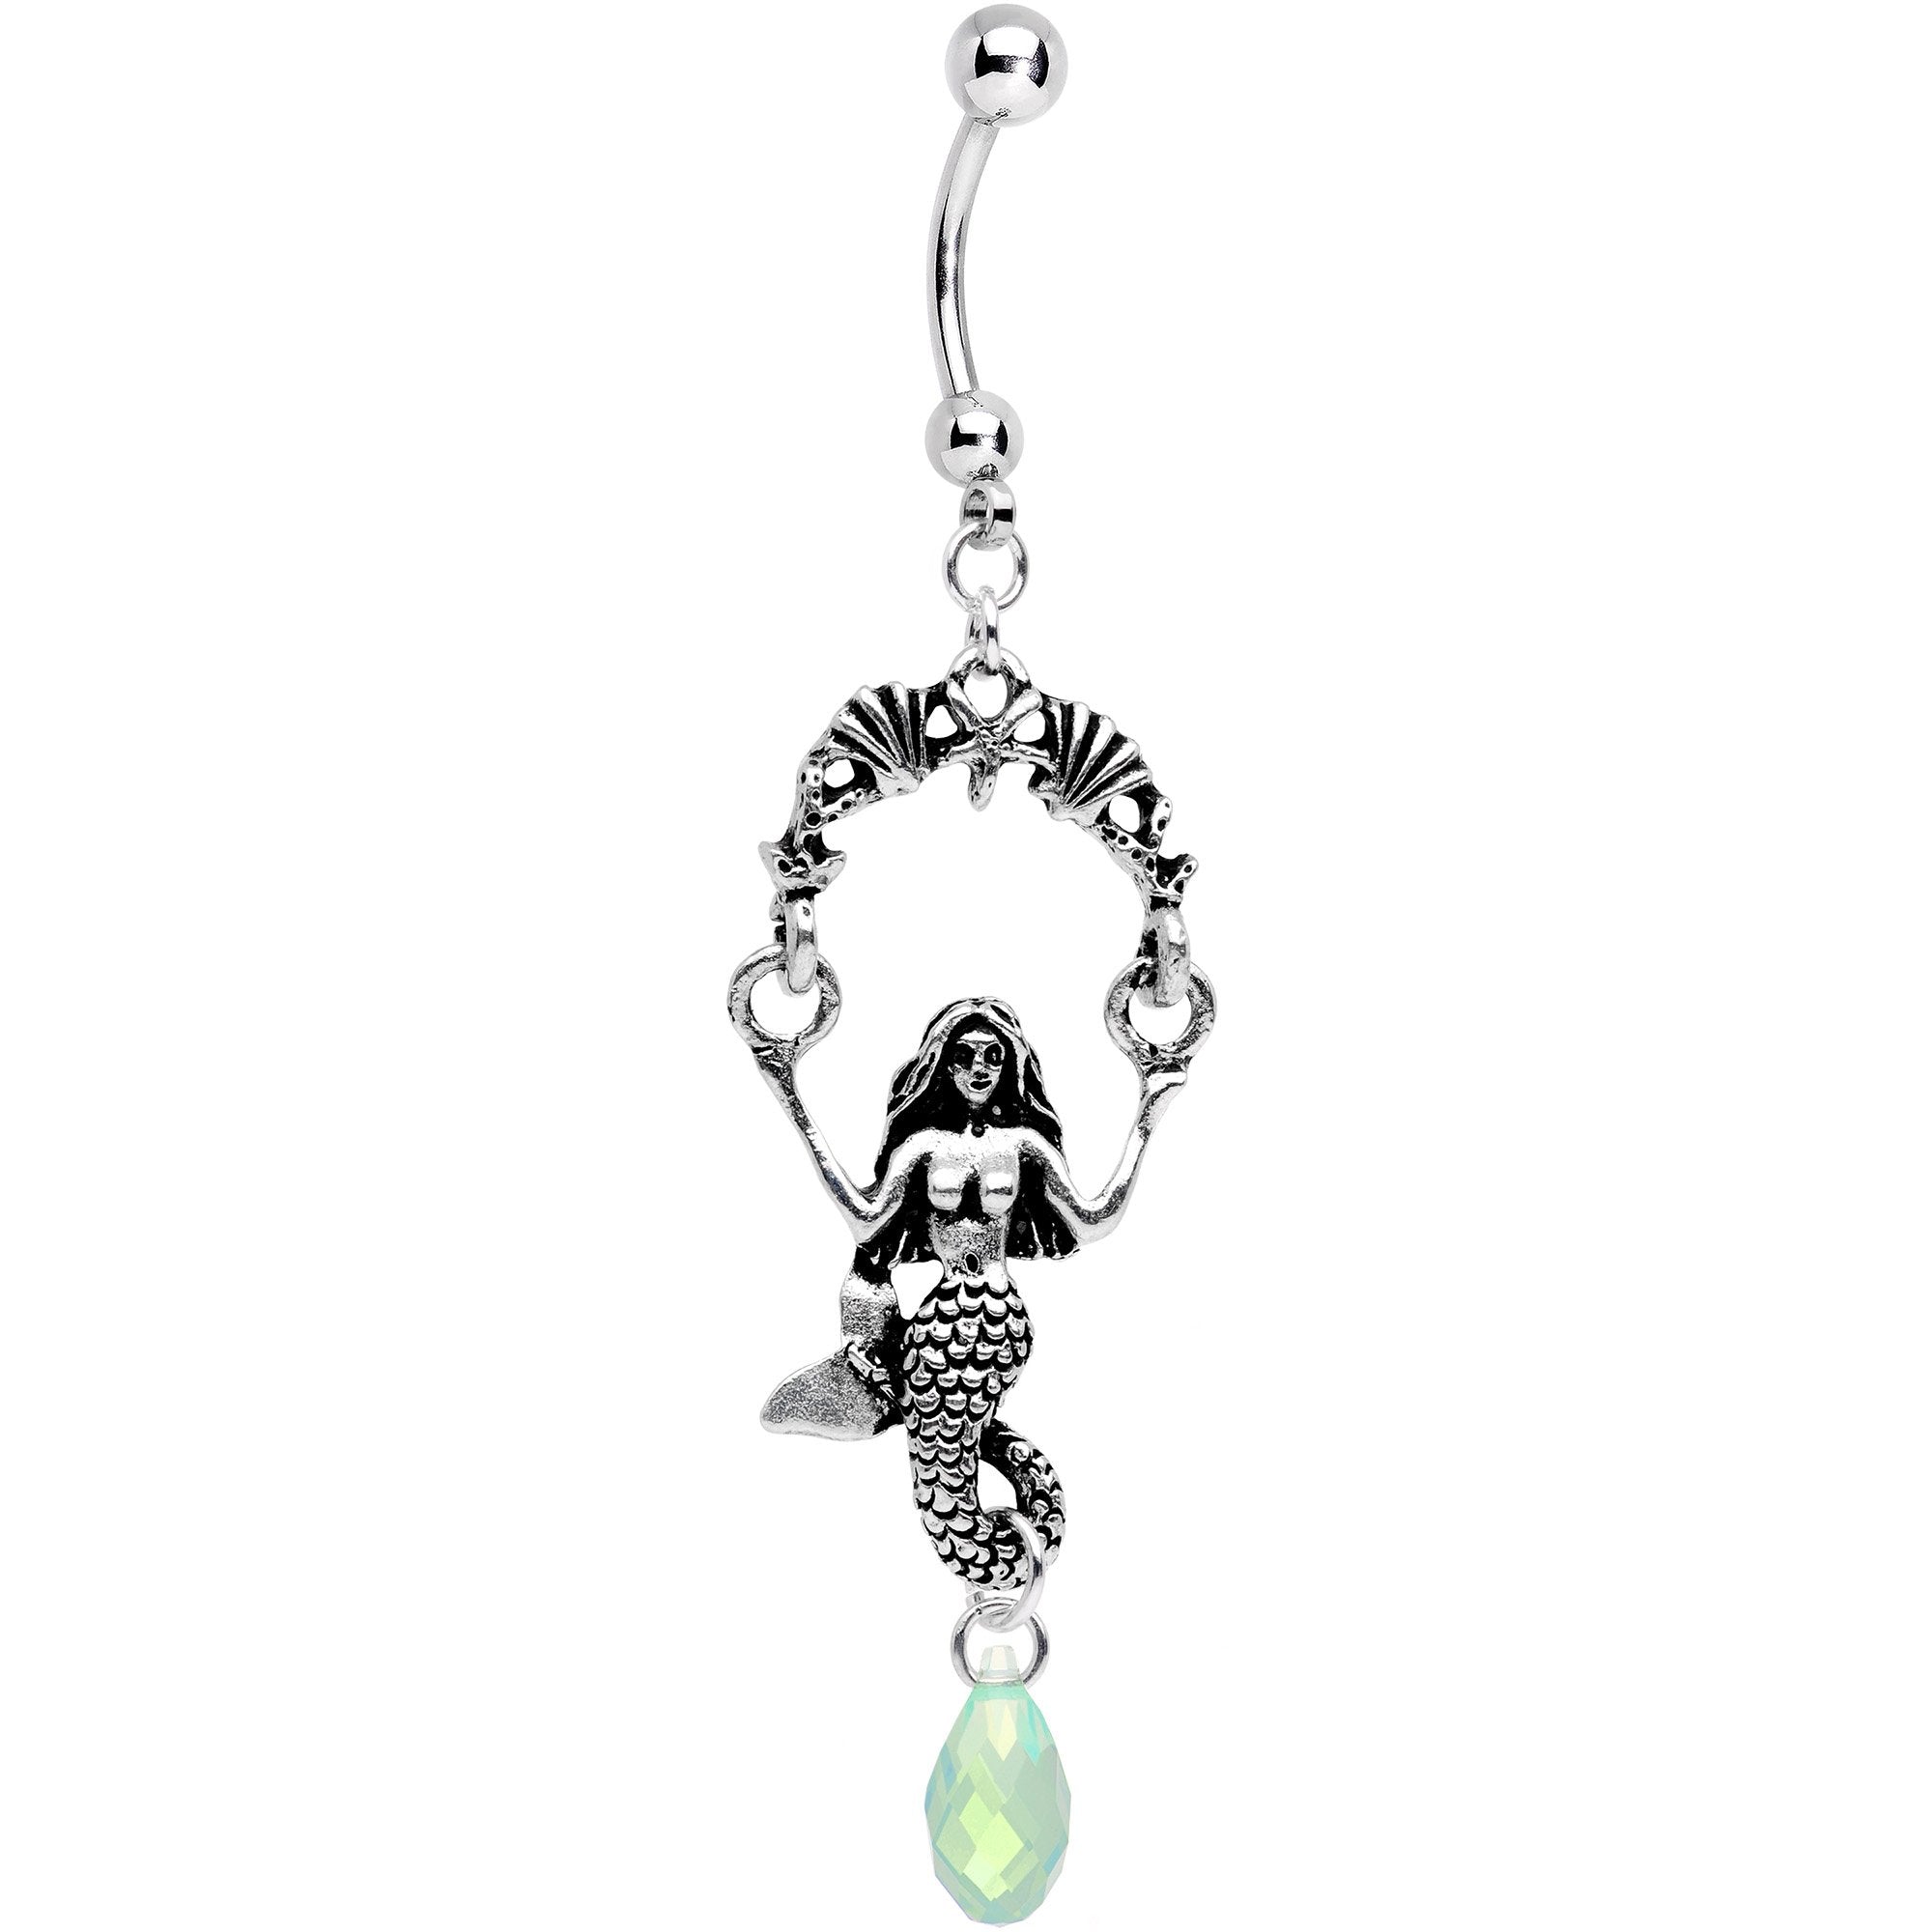 Handcrafted Mermaid Dangle Belly Ring Created with Crystals